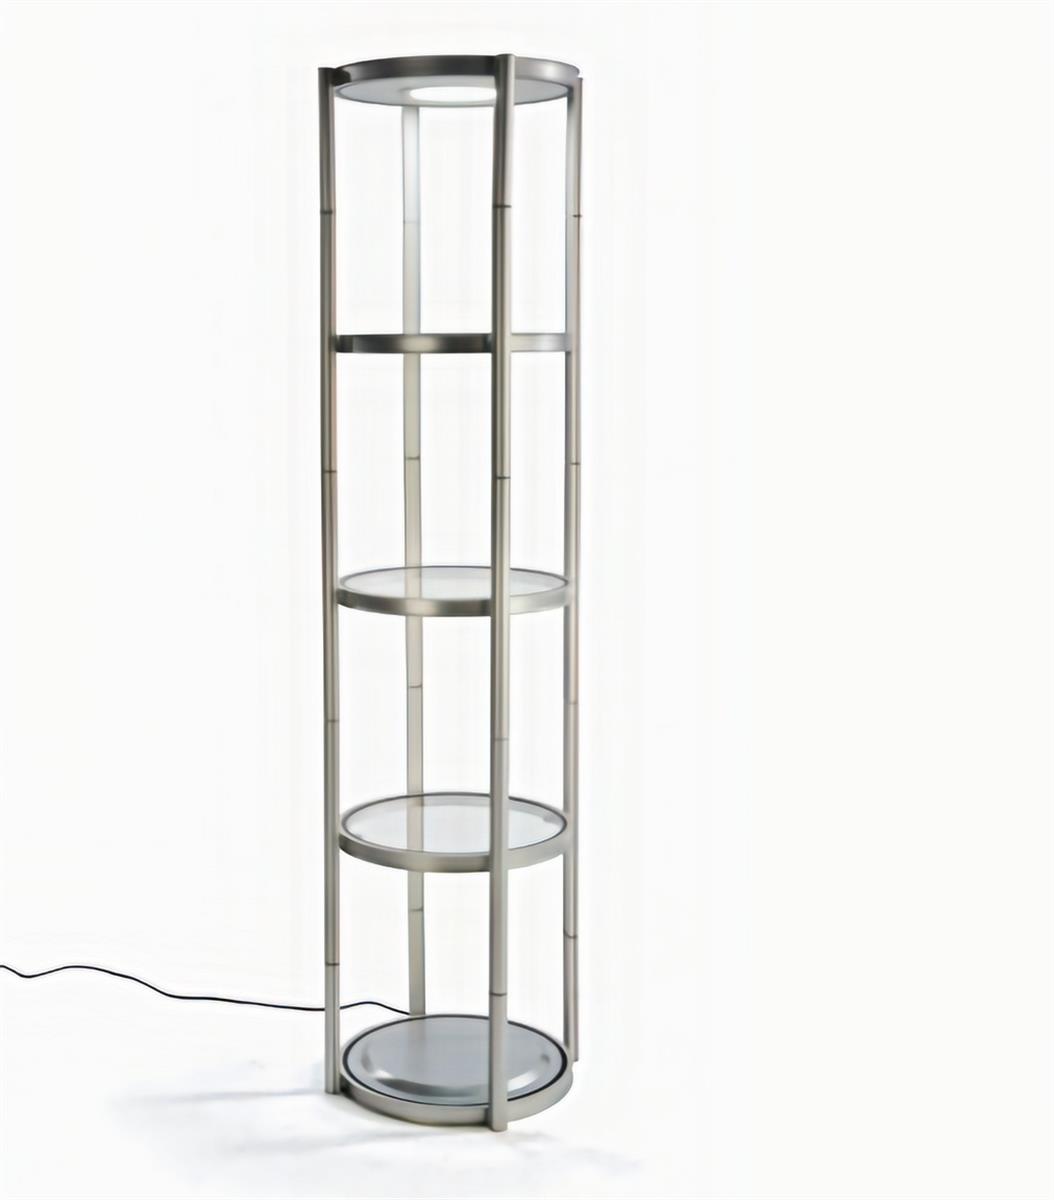 Portable Round Twist Tower Display Case, Collapsible Shelves Portable